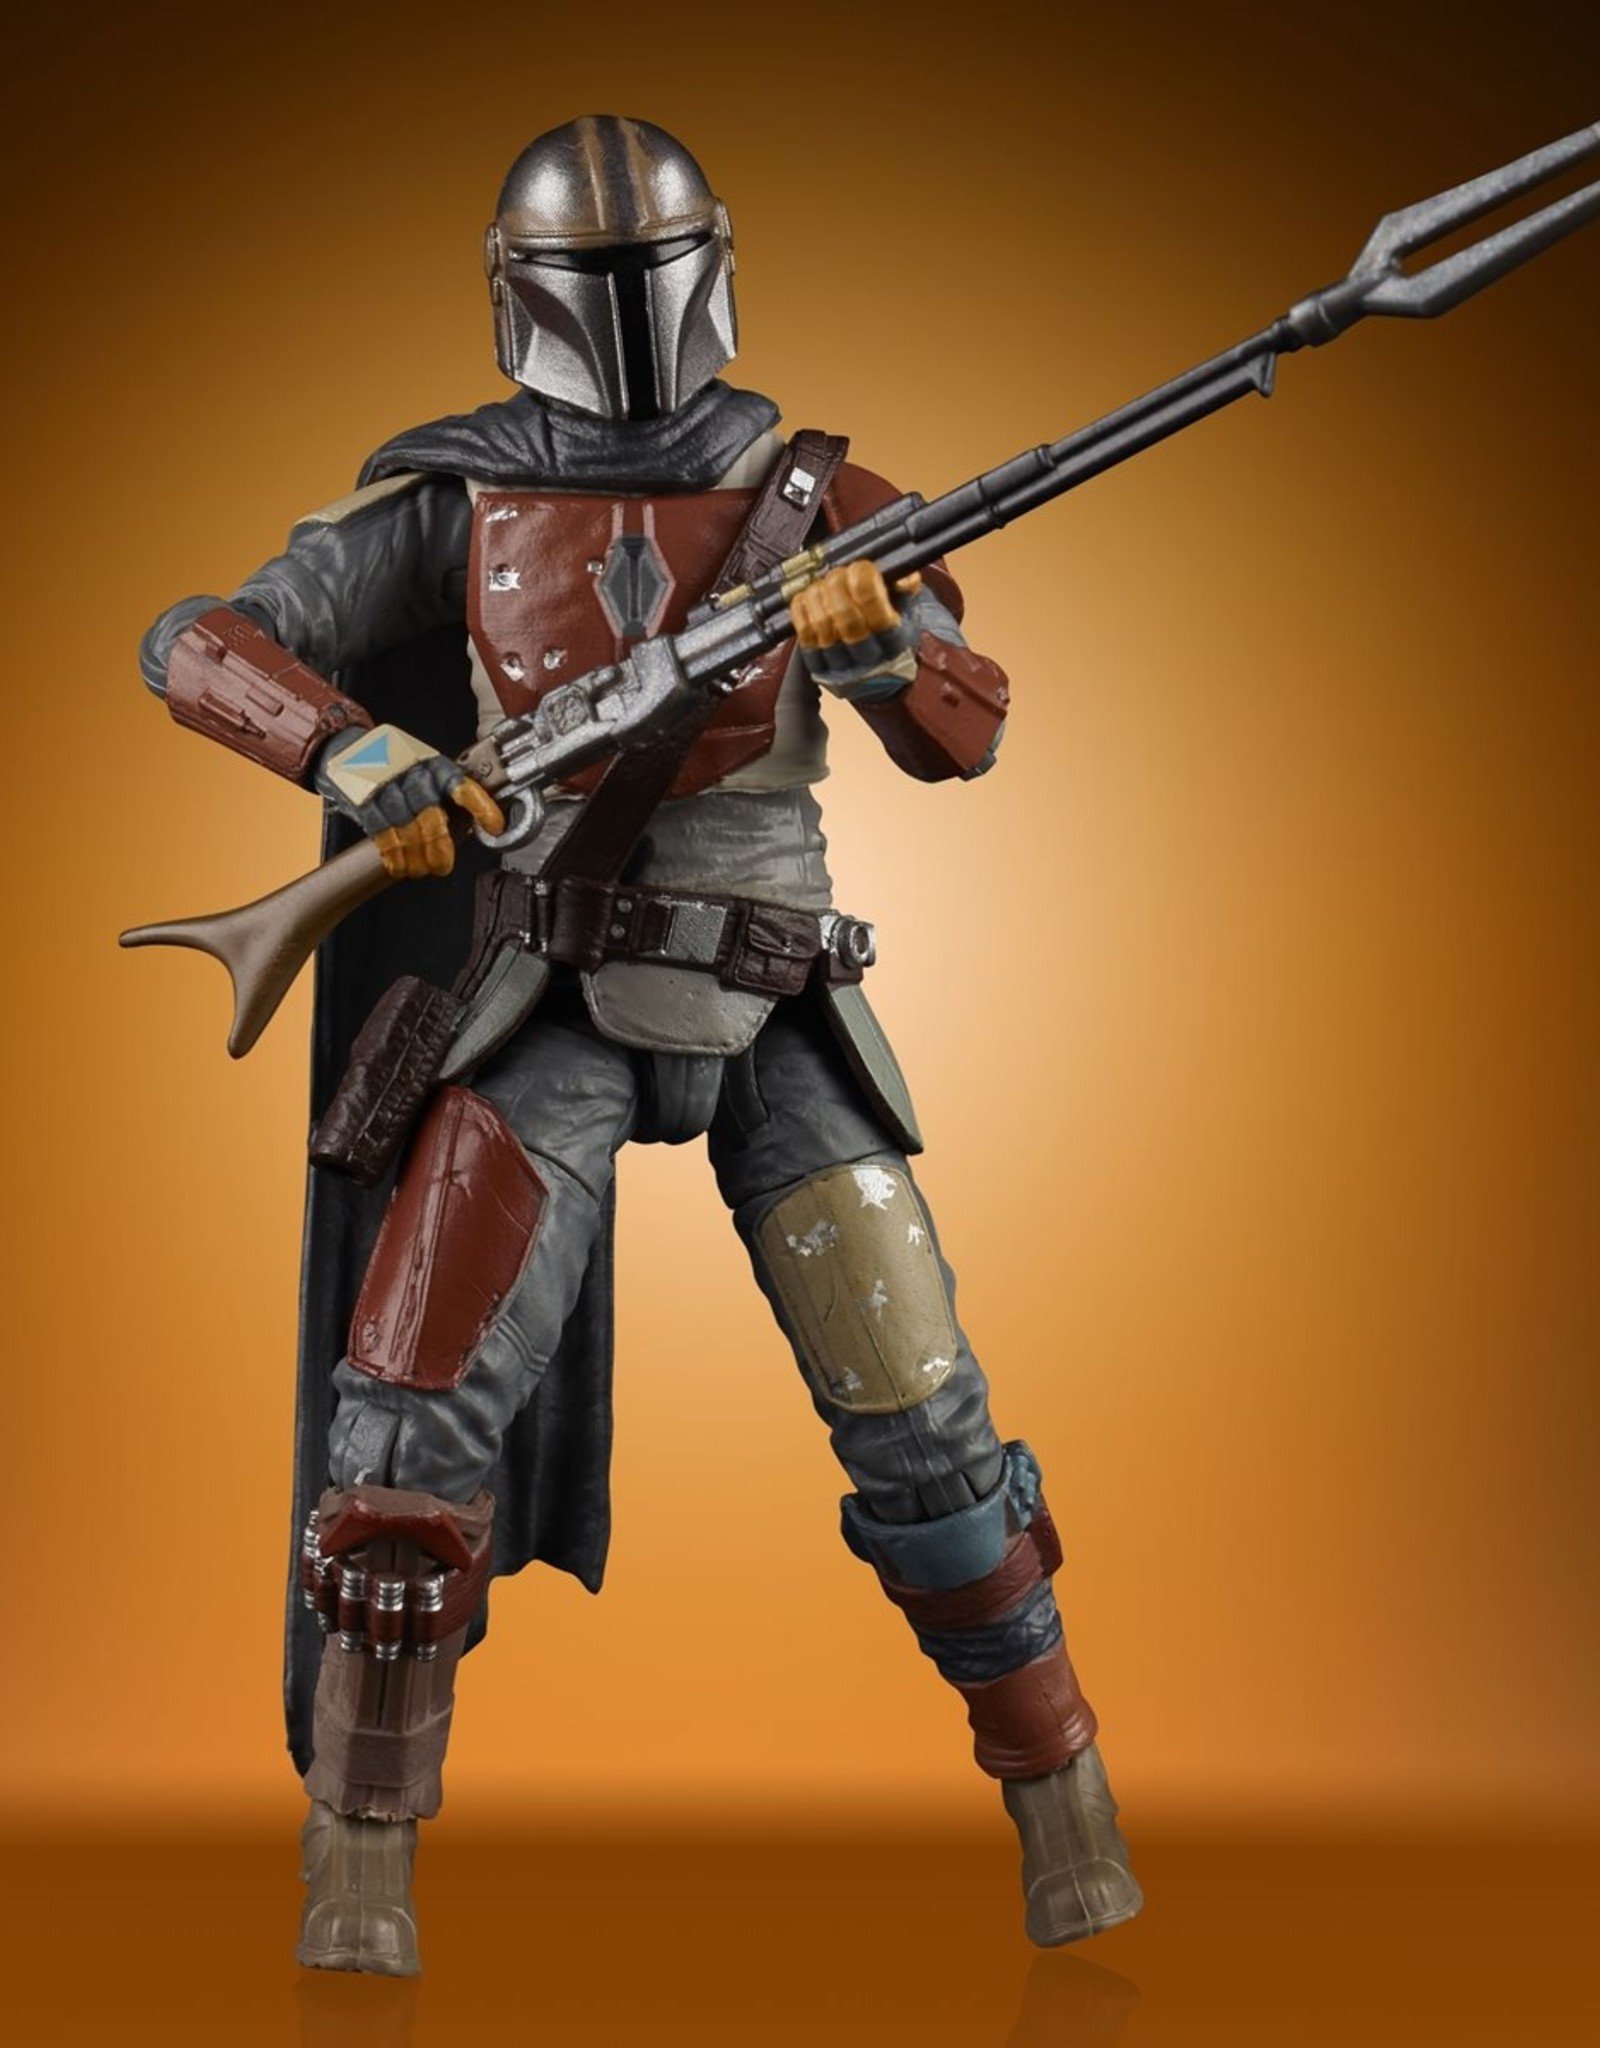 HASBRO Star Wars - The Vintage Collection: The Mandalorian (2020)